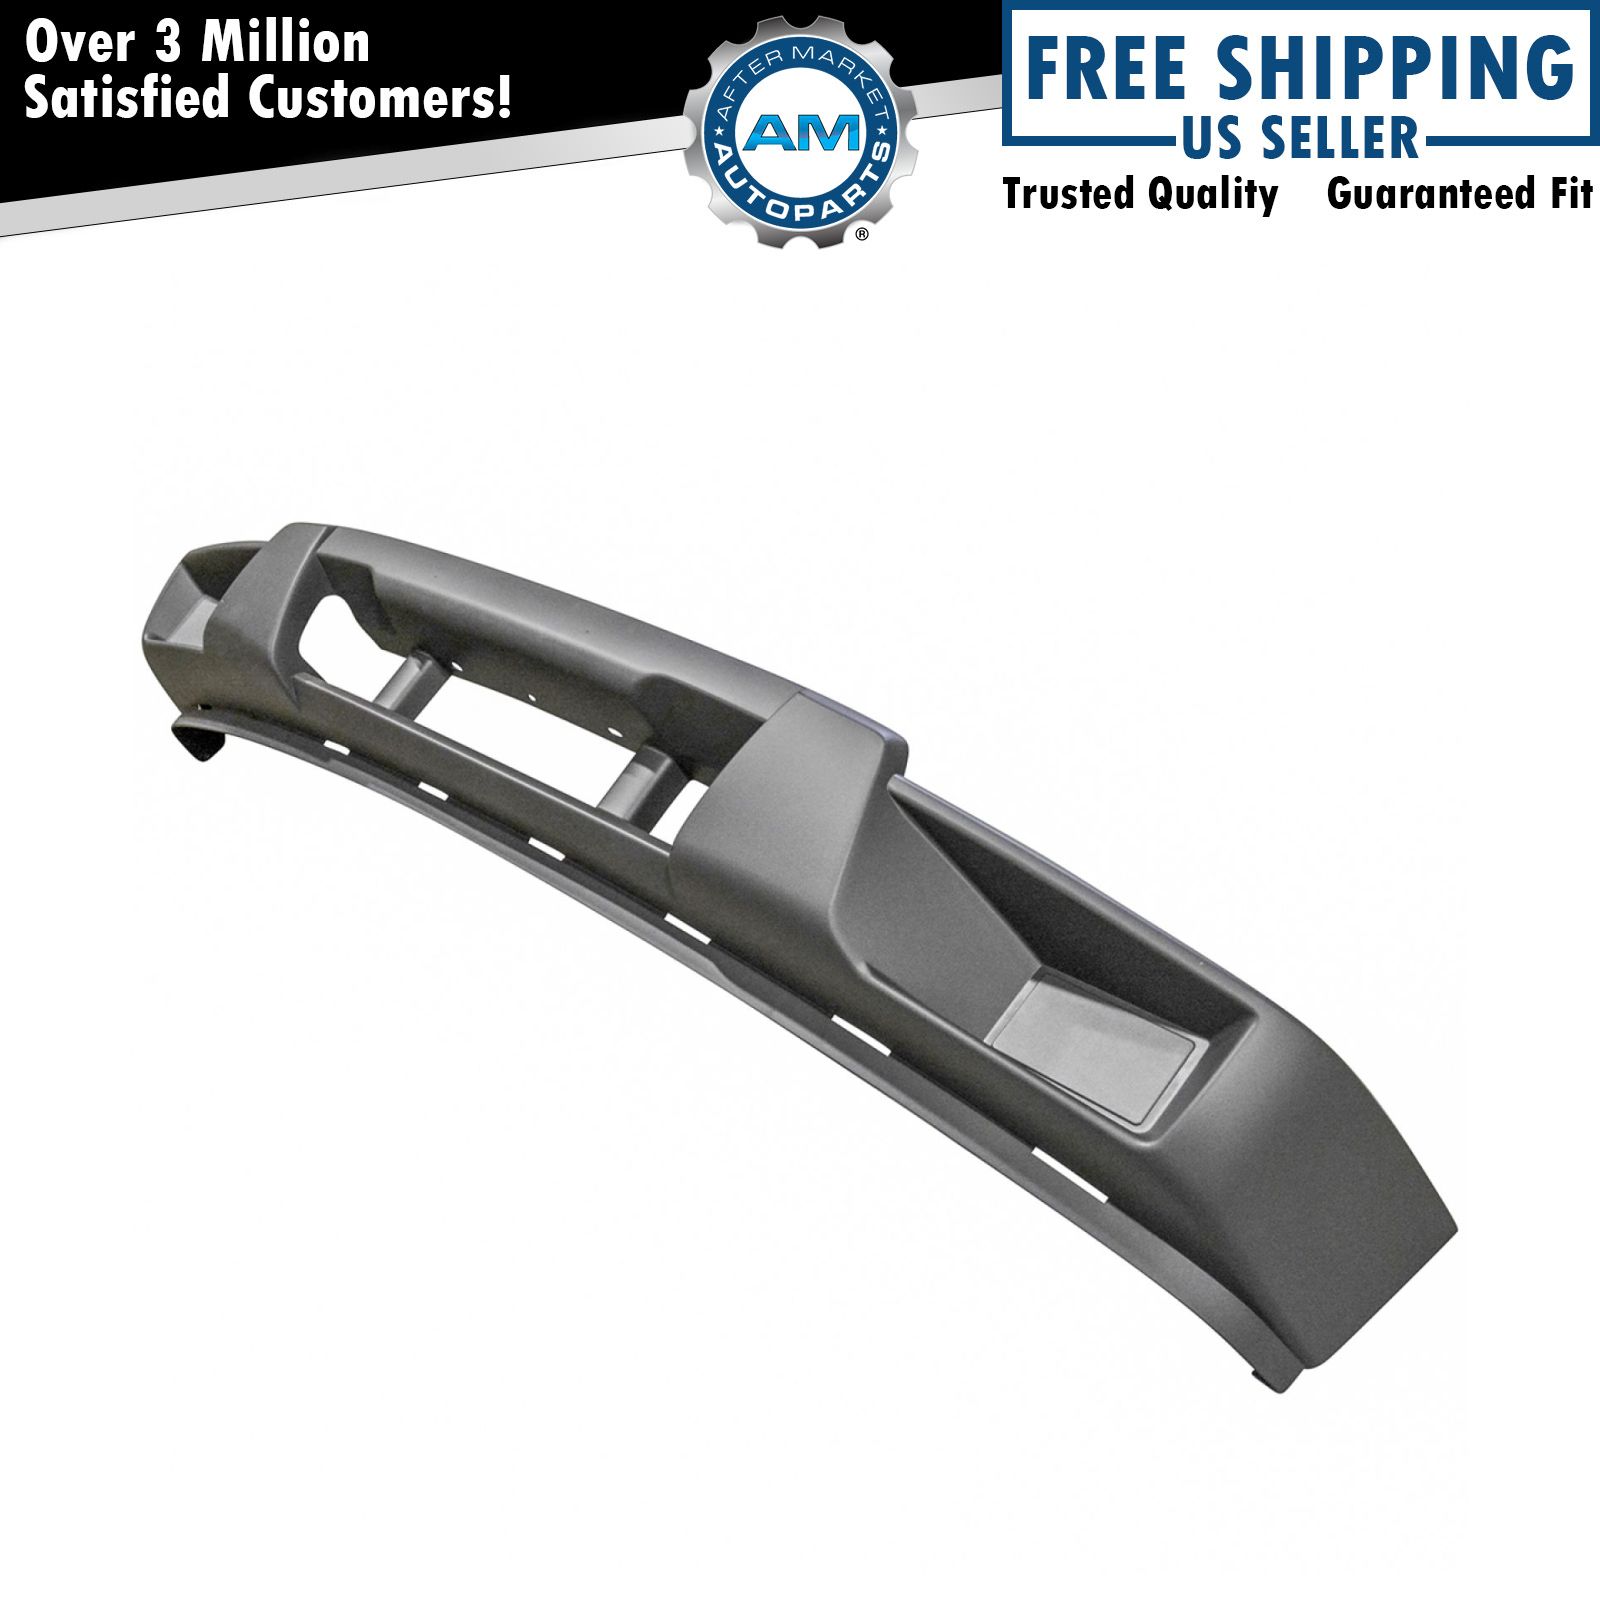 Front Lower Bumper Cover for 04-12 Chevy Colorado GMC Canyon Brand New